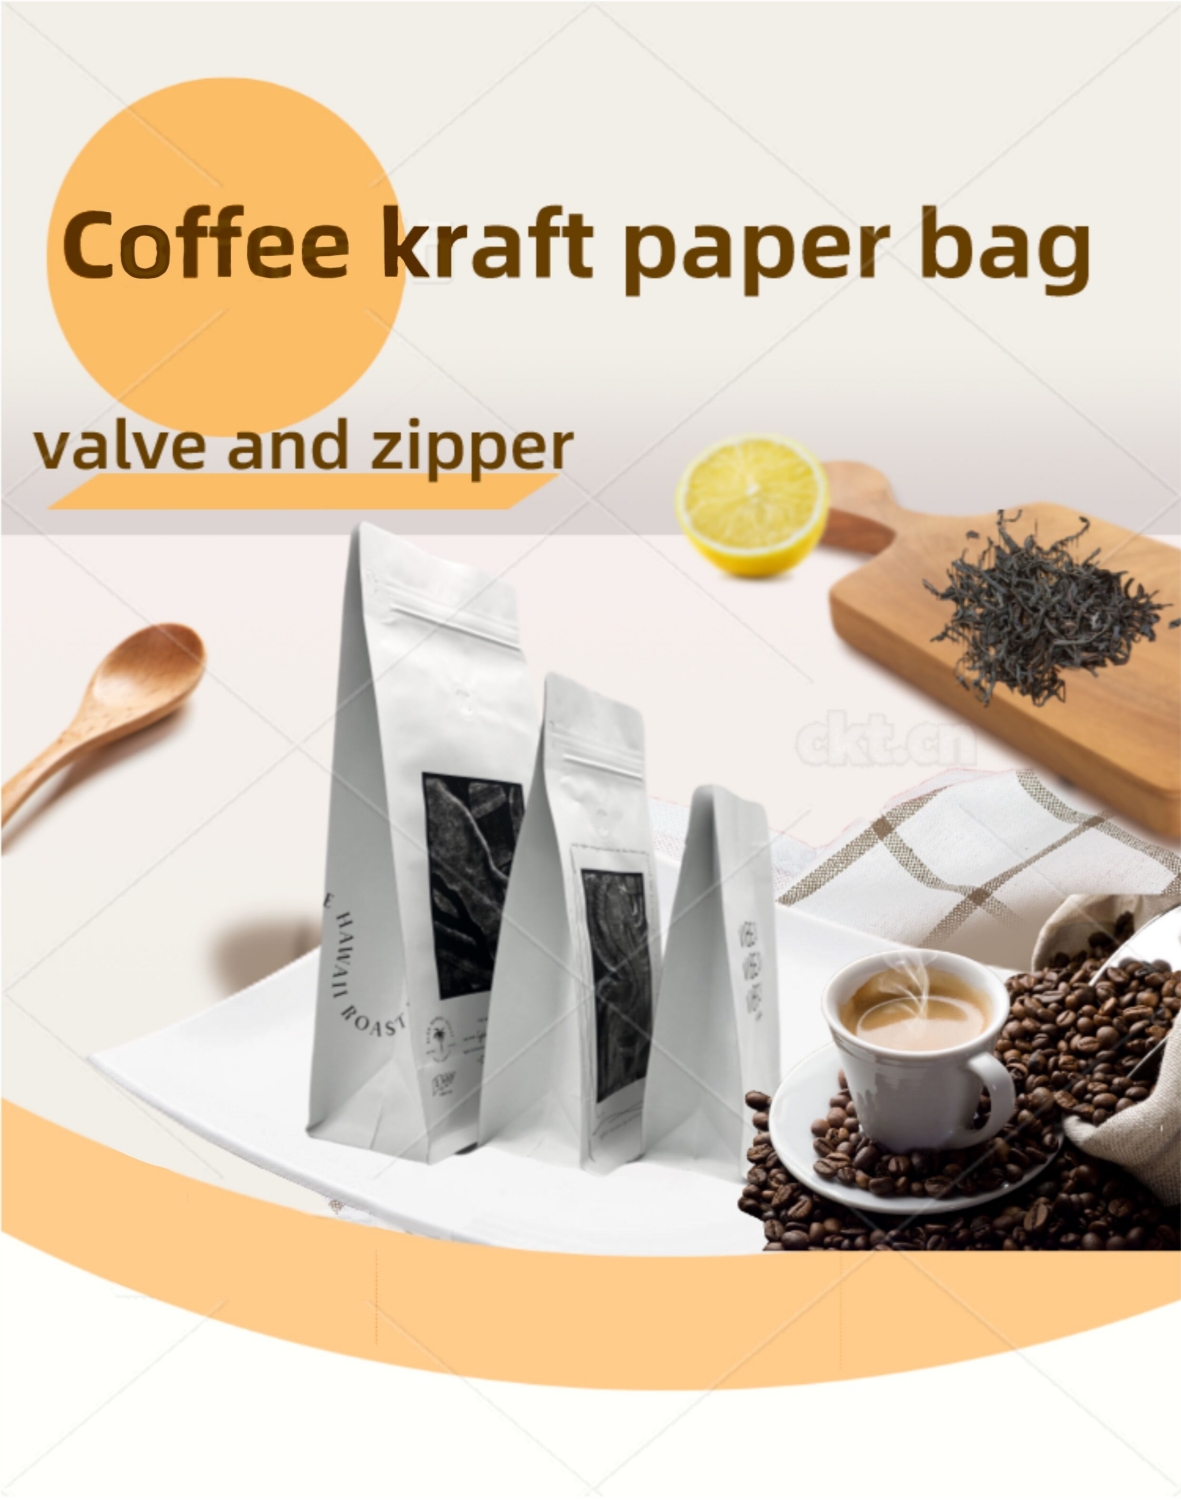 Sustainable Coffee Packaging_副本